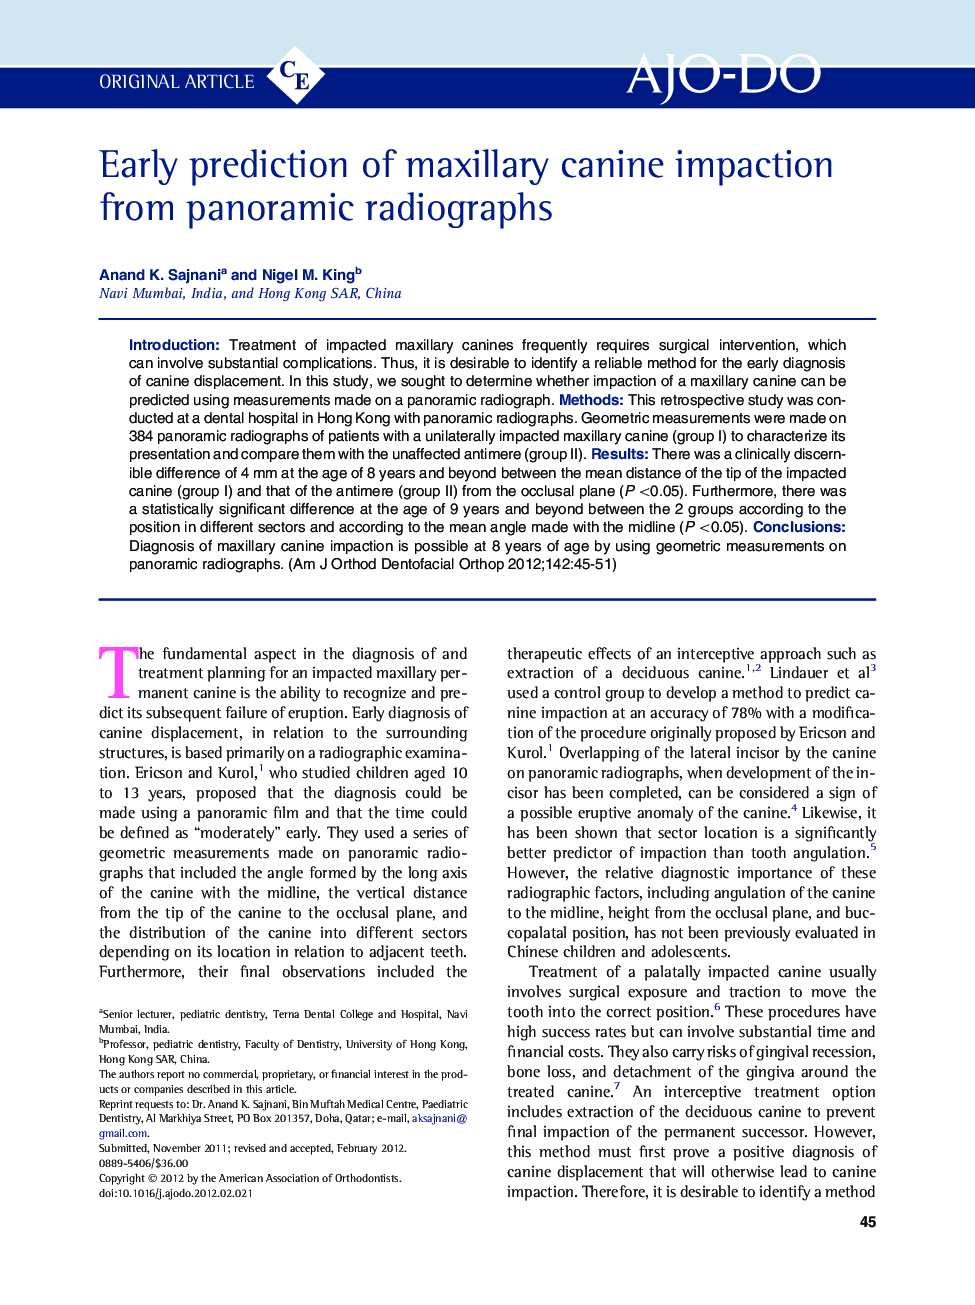 Early prediction of maxillary canine impaction from panoramic radiographs 